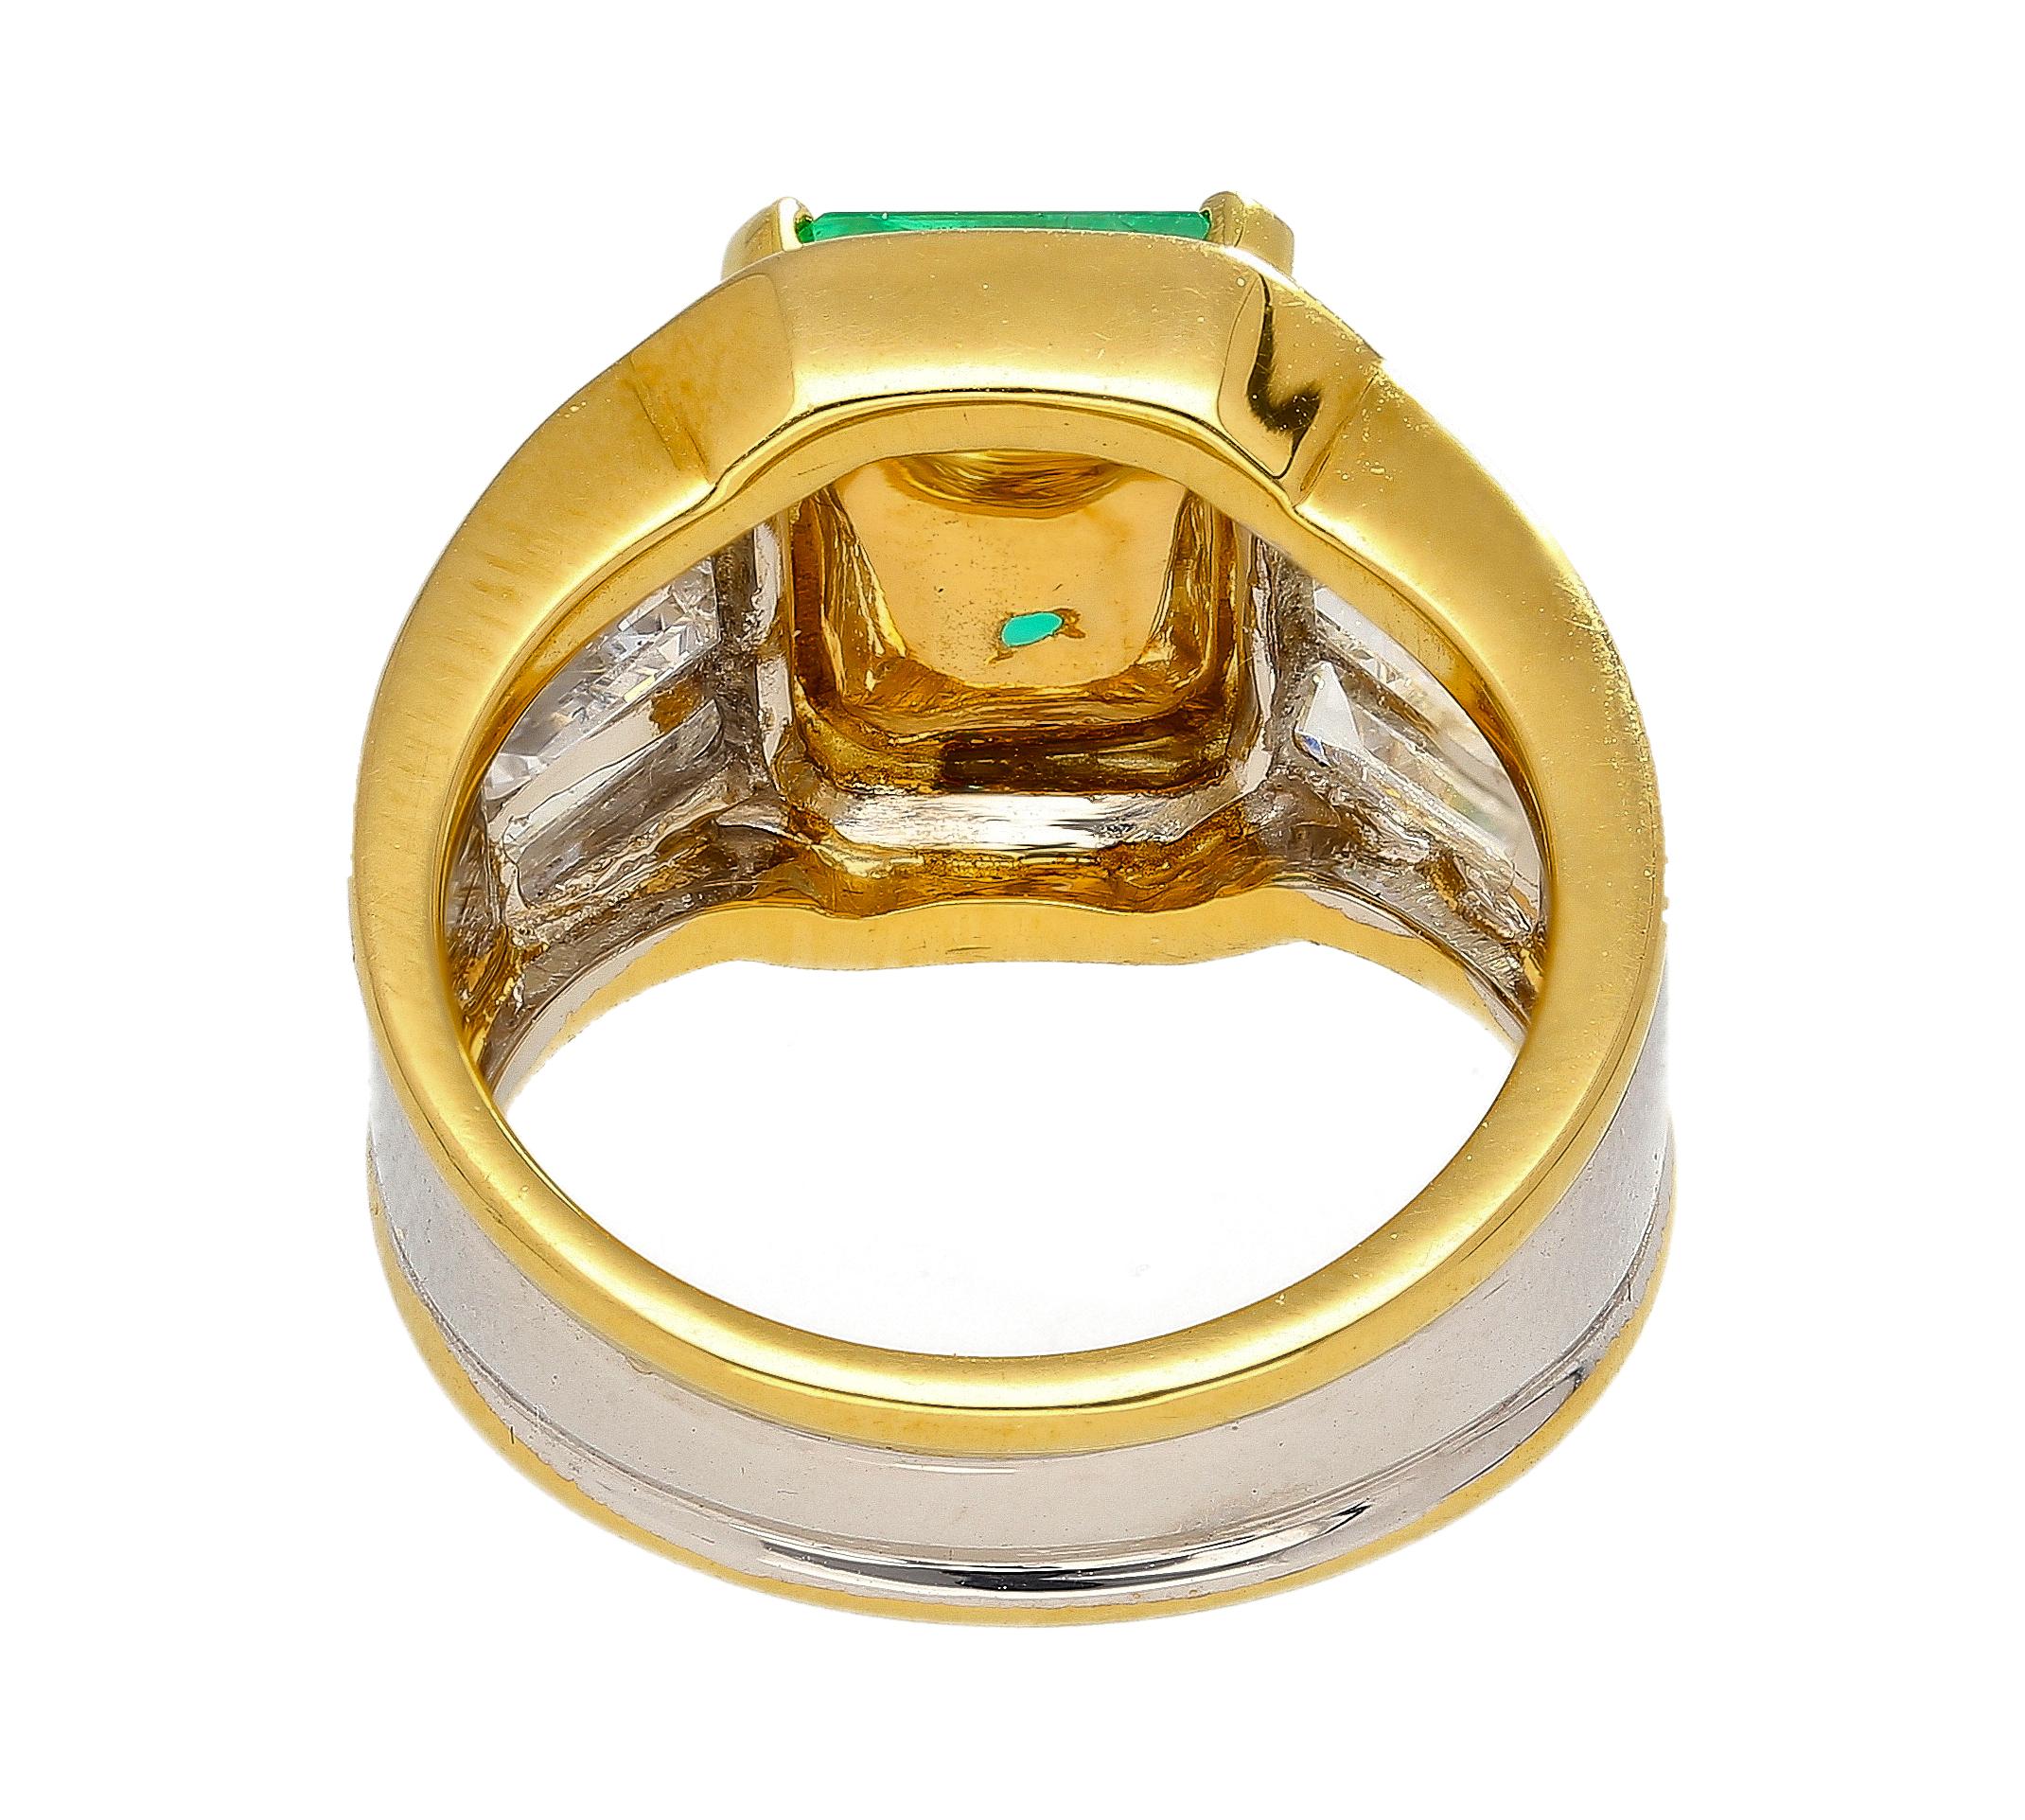 Emerald Cut 3.16 Carat Colombian Emerald Insignificant Oil Unisex Ring in Platinum & 18K  For Sale